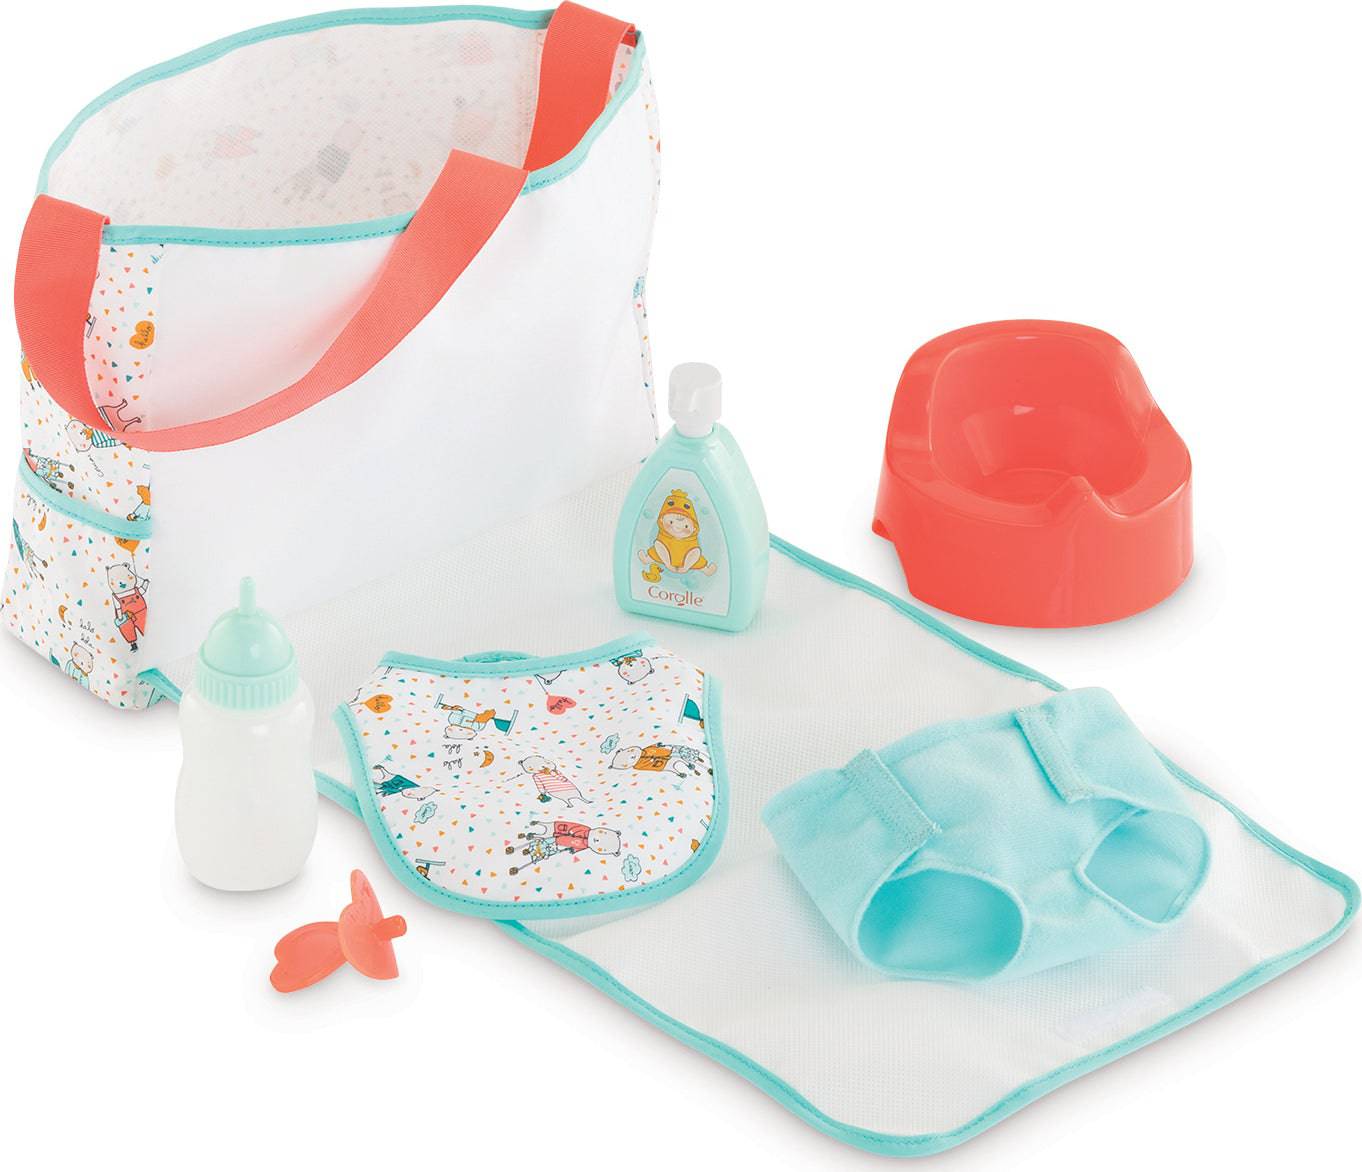 Changing Bag & Accessories Set - A Child's Delight